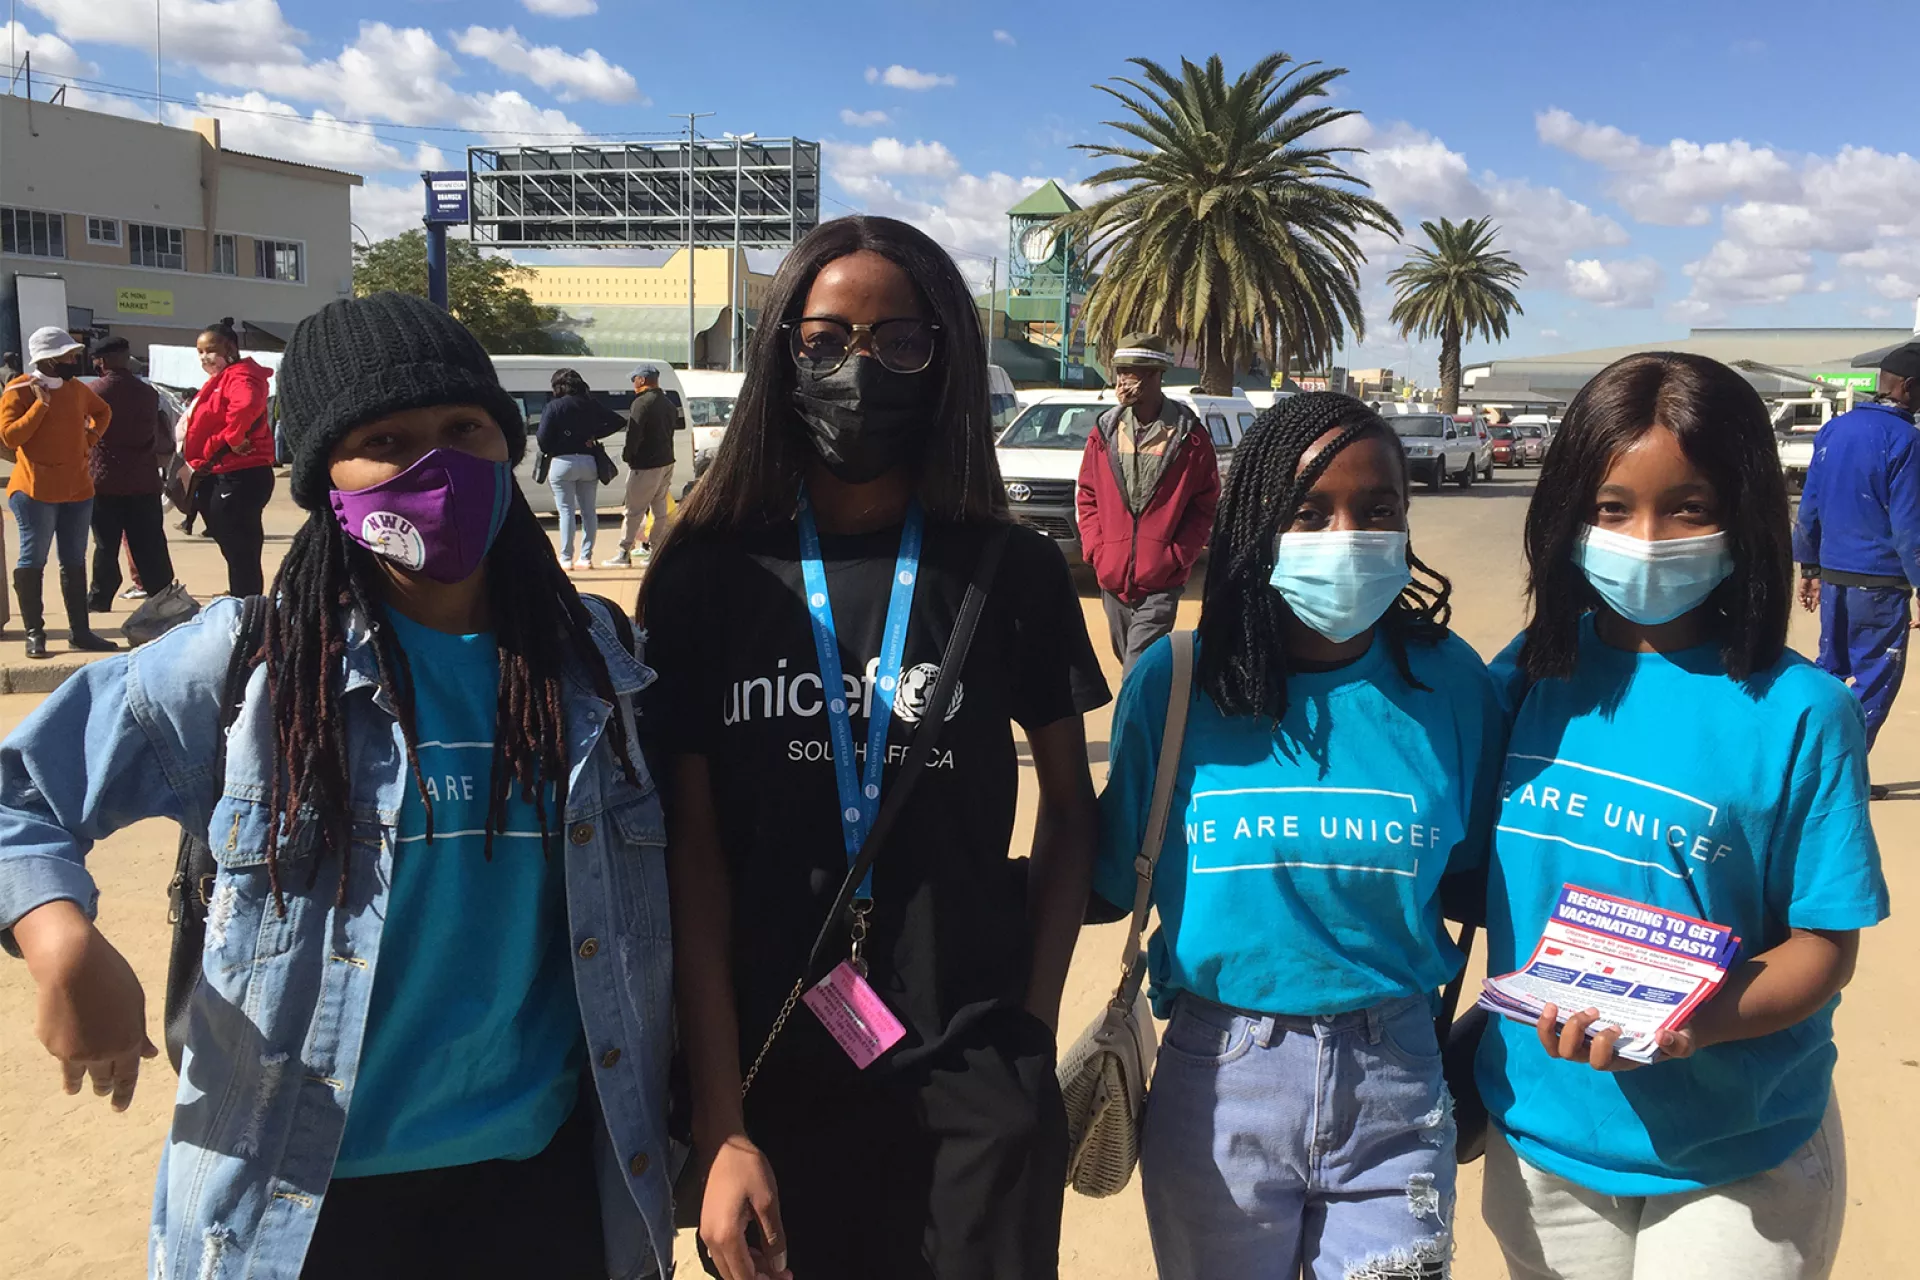 A group of young volunteers wearing UNICEF shirts on a street in South Africa